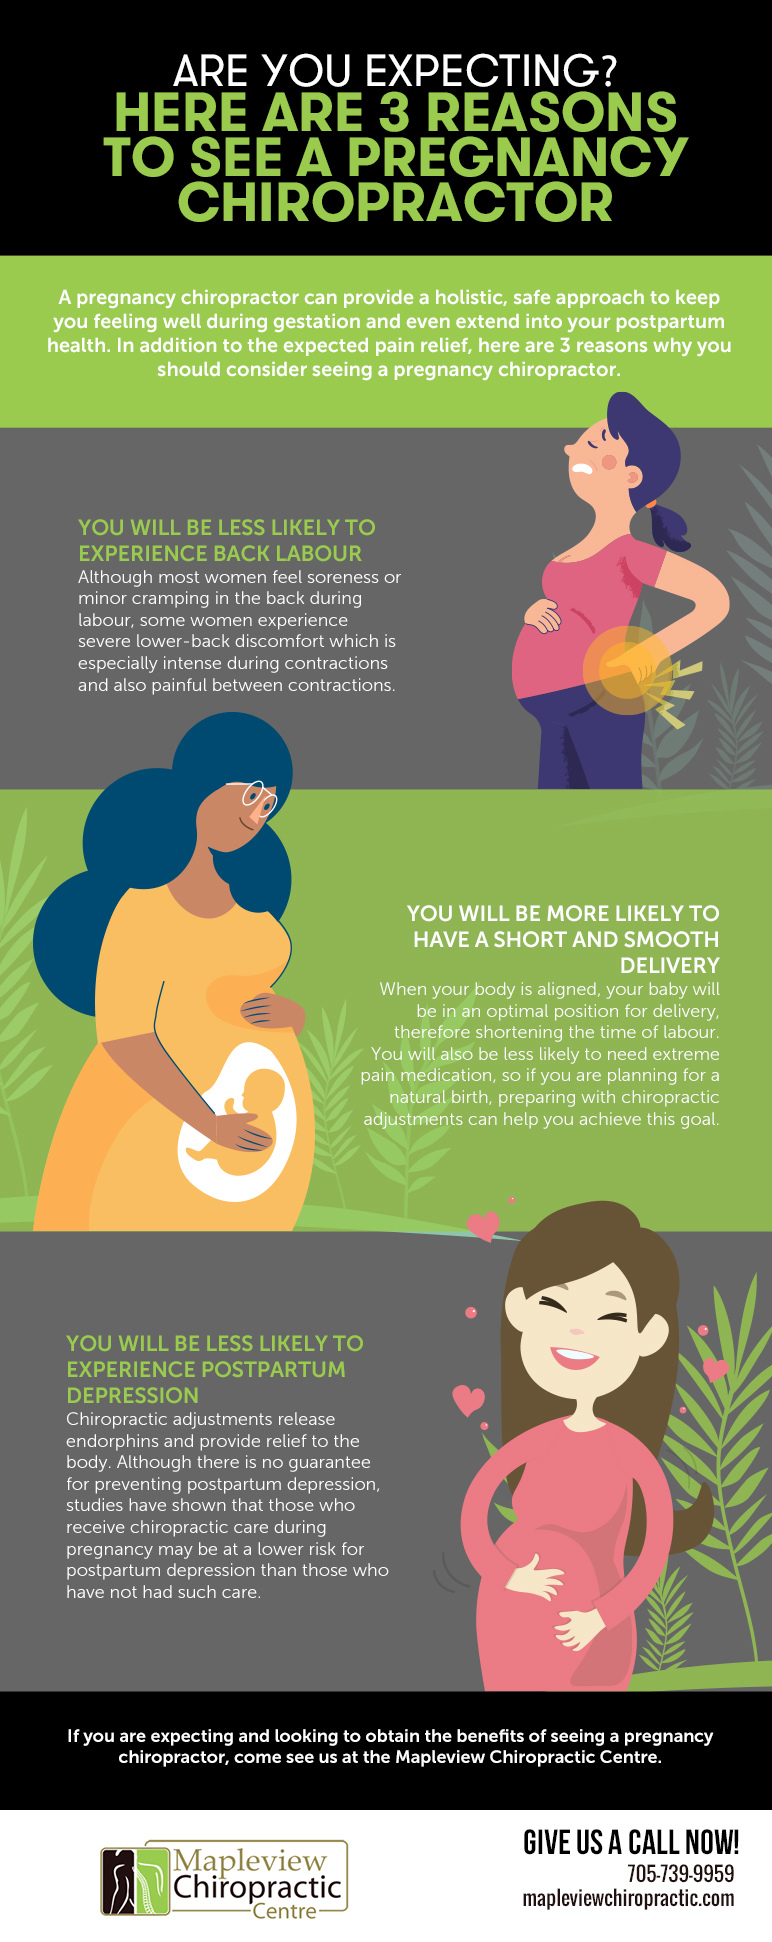 Are You Expecting? Here Are 3 Reasons to See a Pregnancy Chiropractor